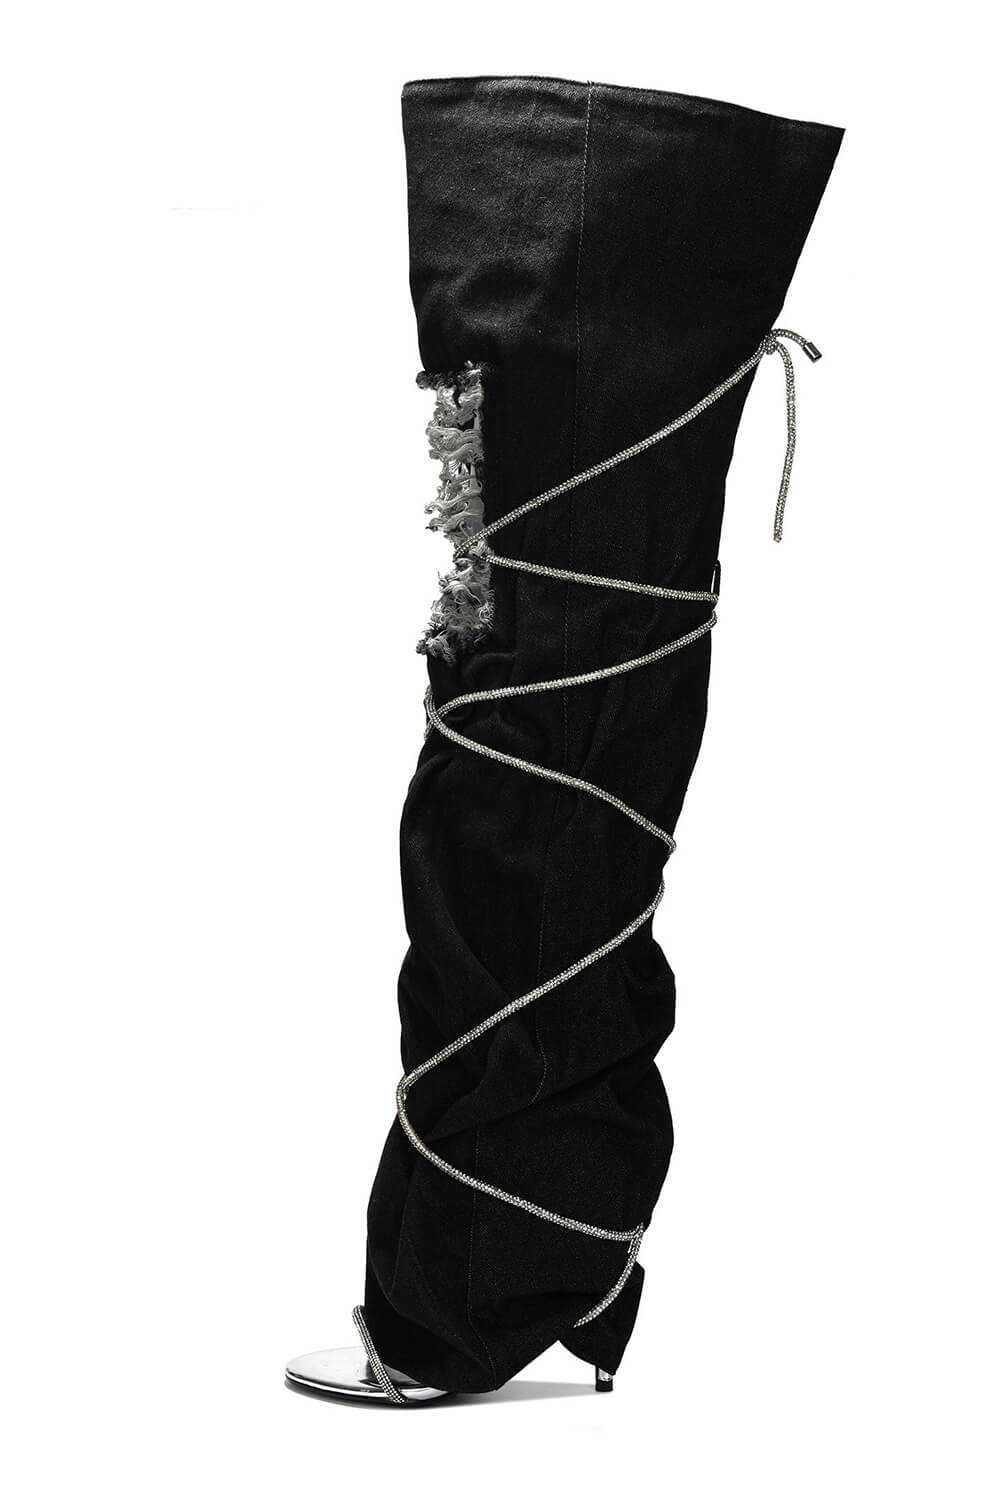 Rhinestone Rope Wrap Lace Up Fold Over Over The Knee Boots - Black